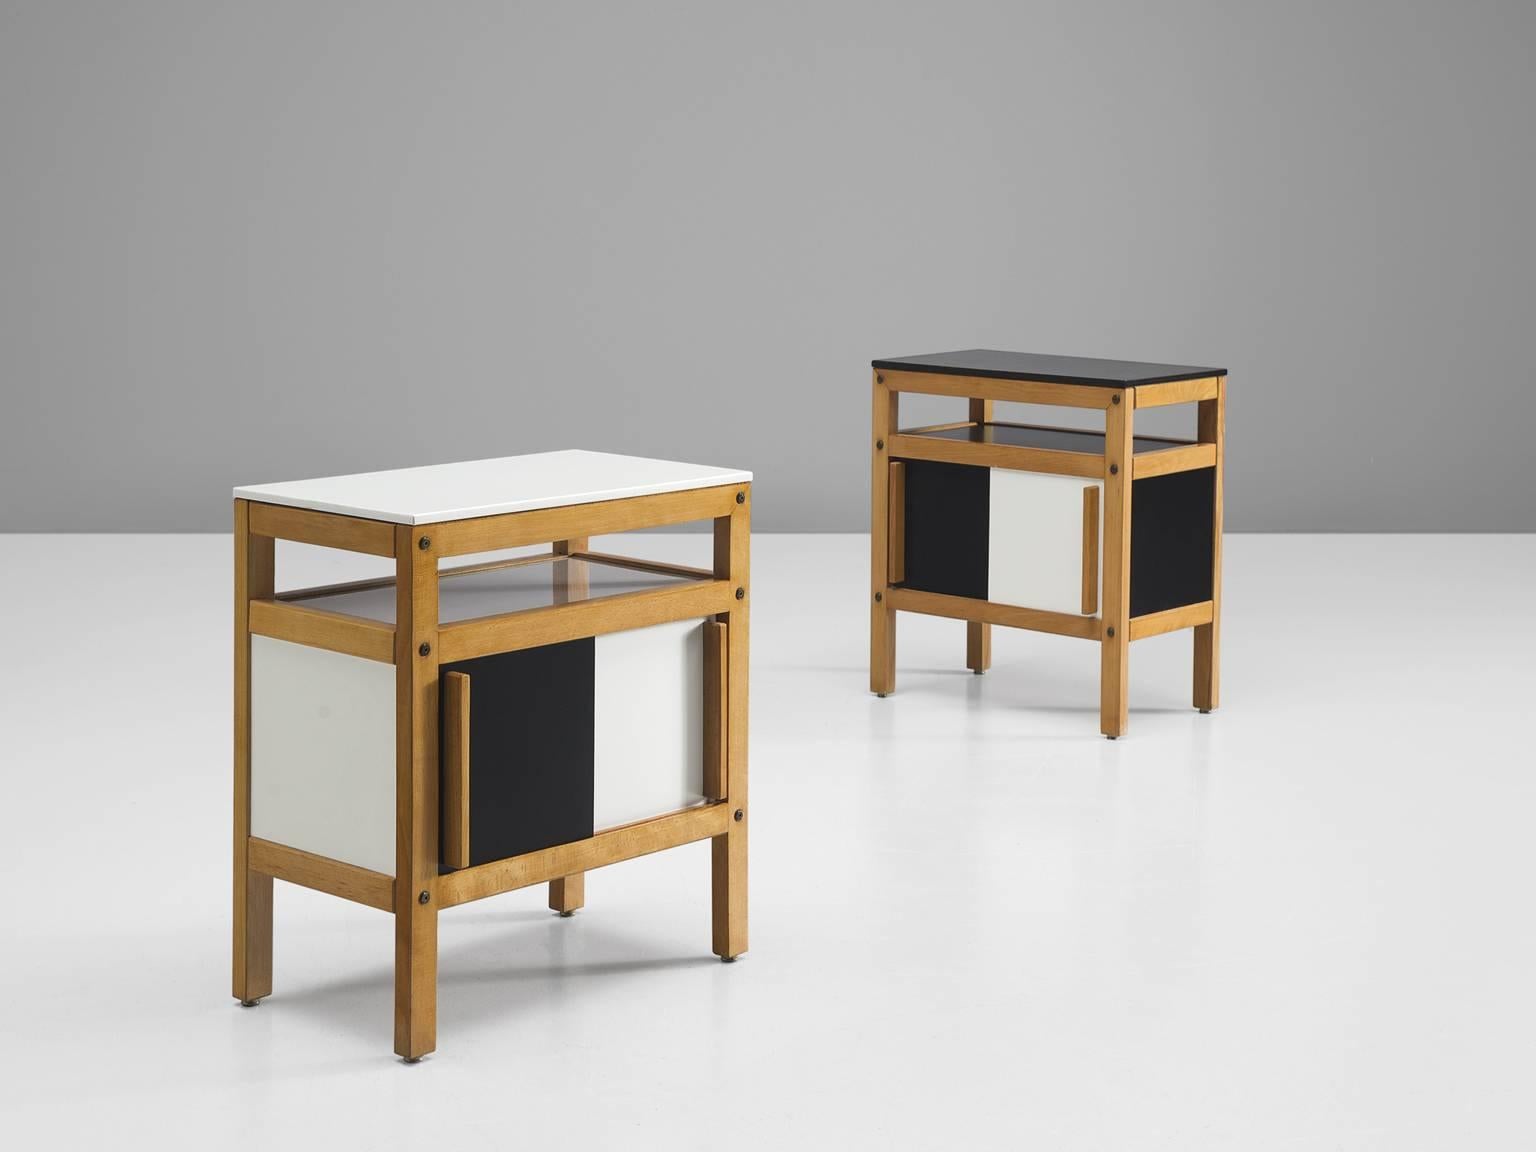 Nightstands, veneer, plywood, wood, in black and white, France, 1950s

These two end tables are archetypical for the geometric, robust and clean designs of Andre Sornay. The tables feature four sturdy legs, sliding black and white doors, an open